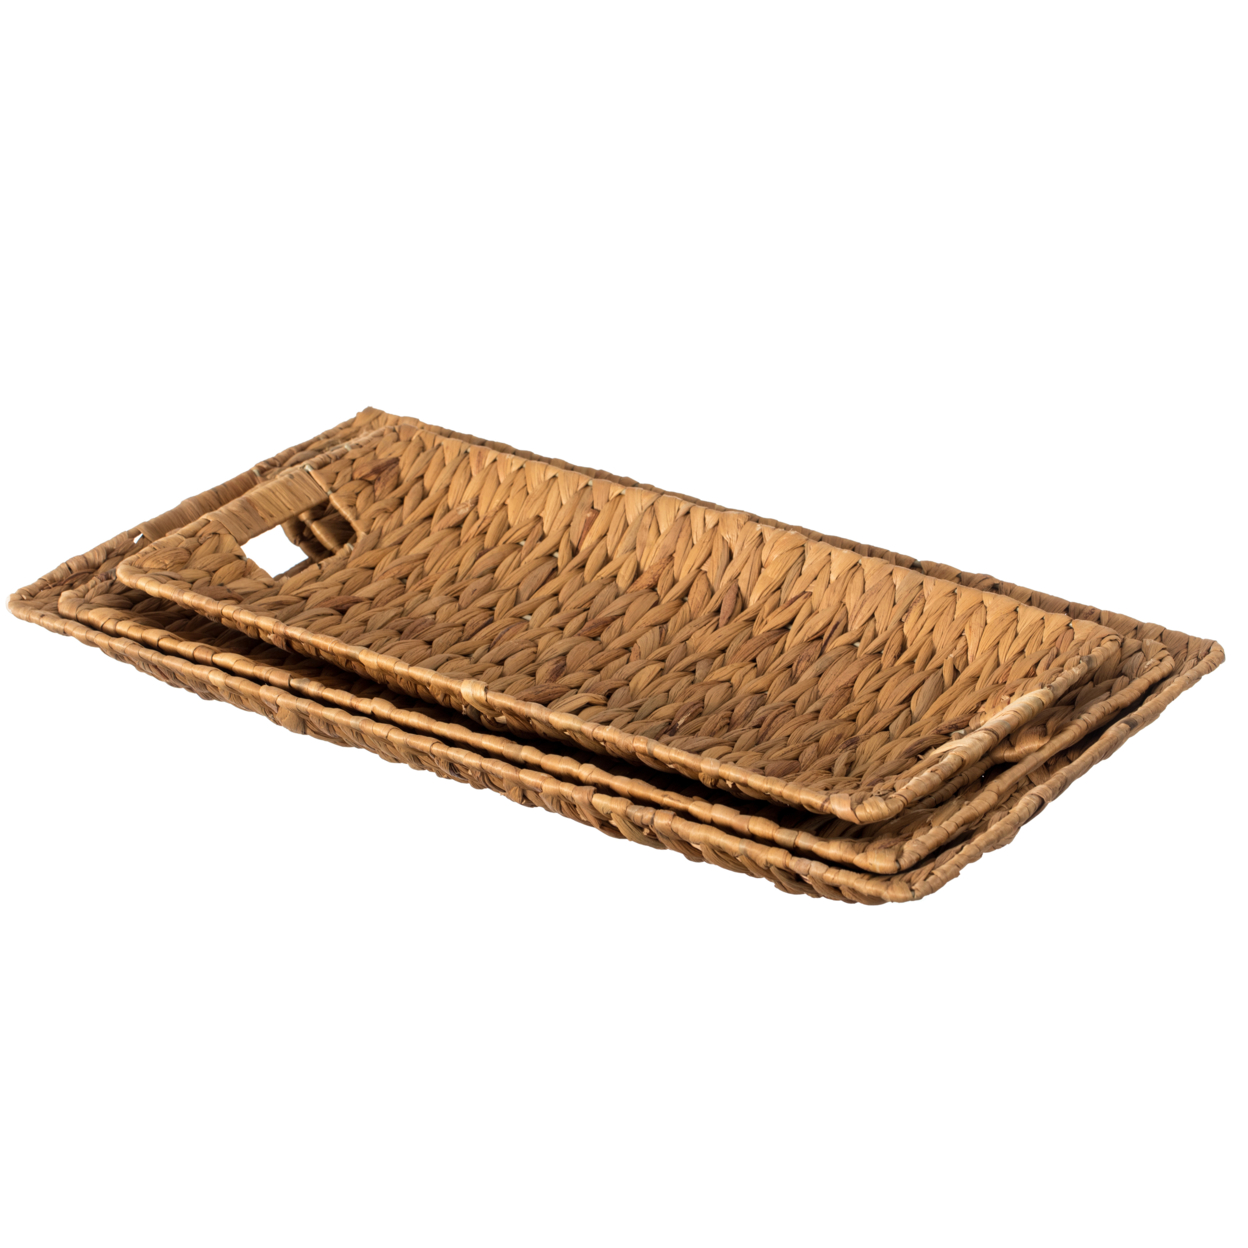 Natural Decorative Rectangular Hand-Woven Water Hyacinth Serving Tray With Built-in Handles - Small